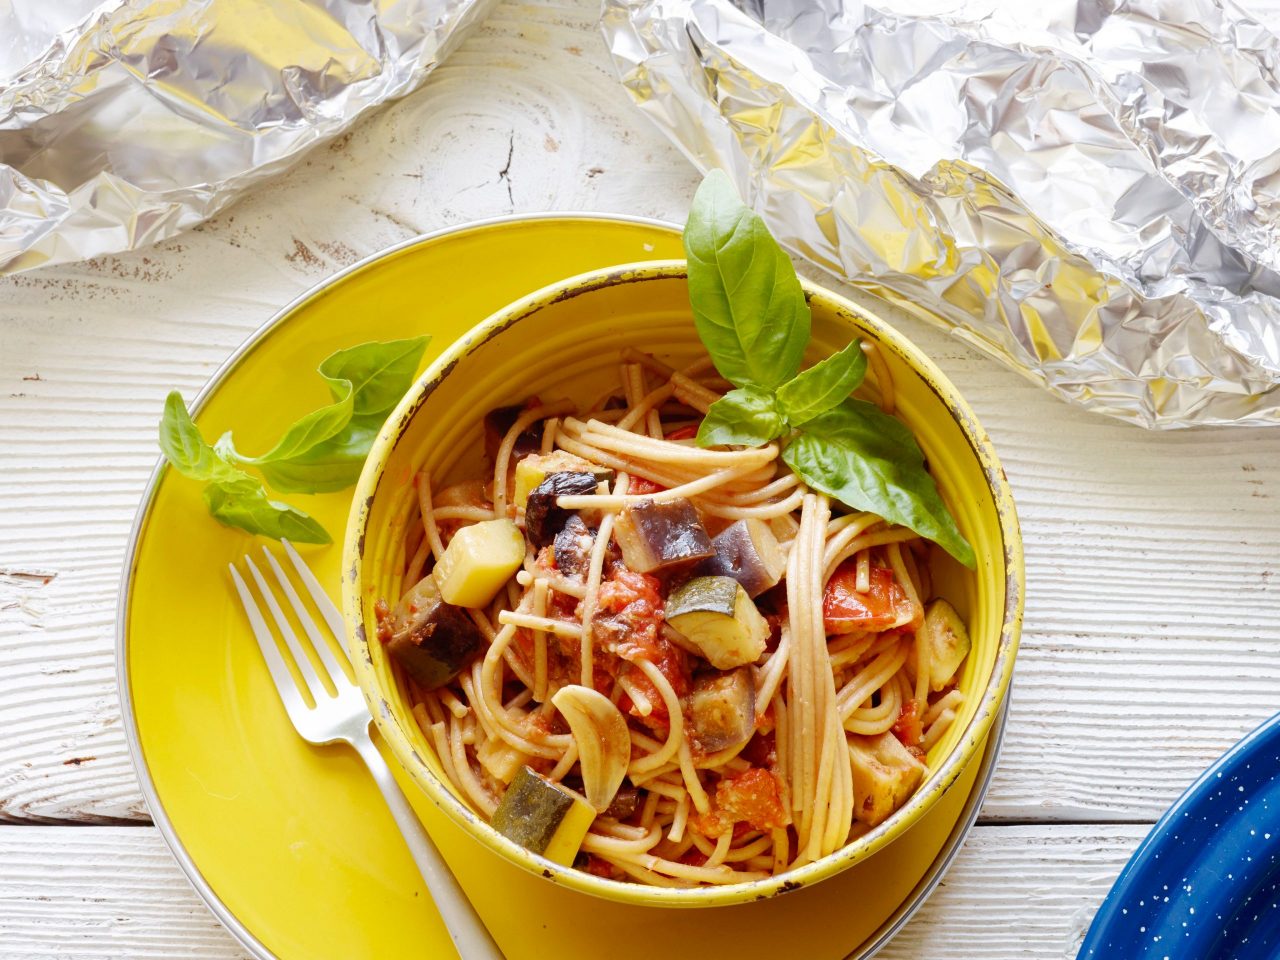 Food Network Kitchen's Healthy Grilled Summer Vegetable Spaghetti Foil Pack.